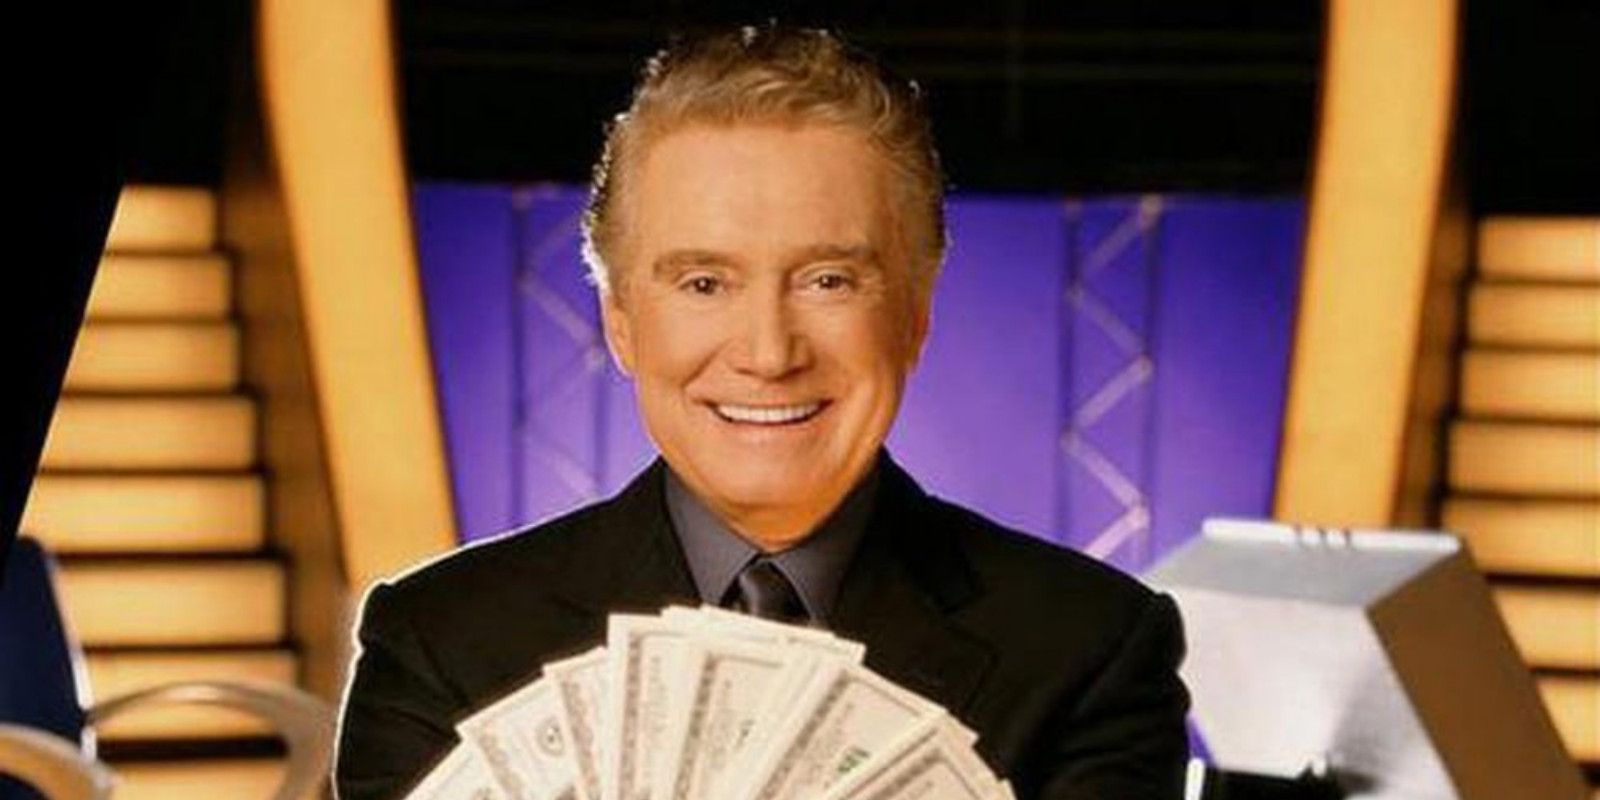 Regis Philbin holding a money fan on the set of Who Wants to Be a Millionaire?